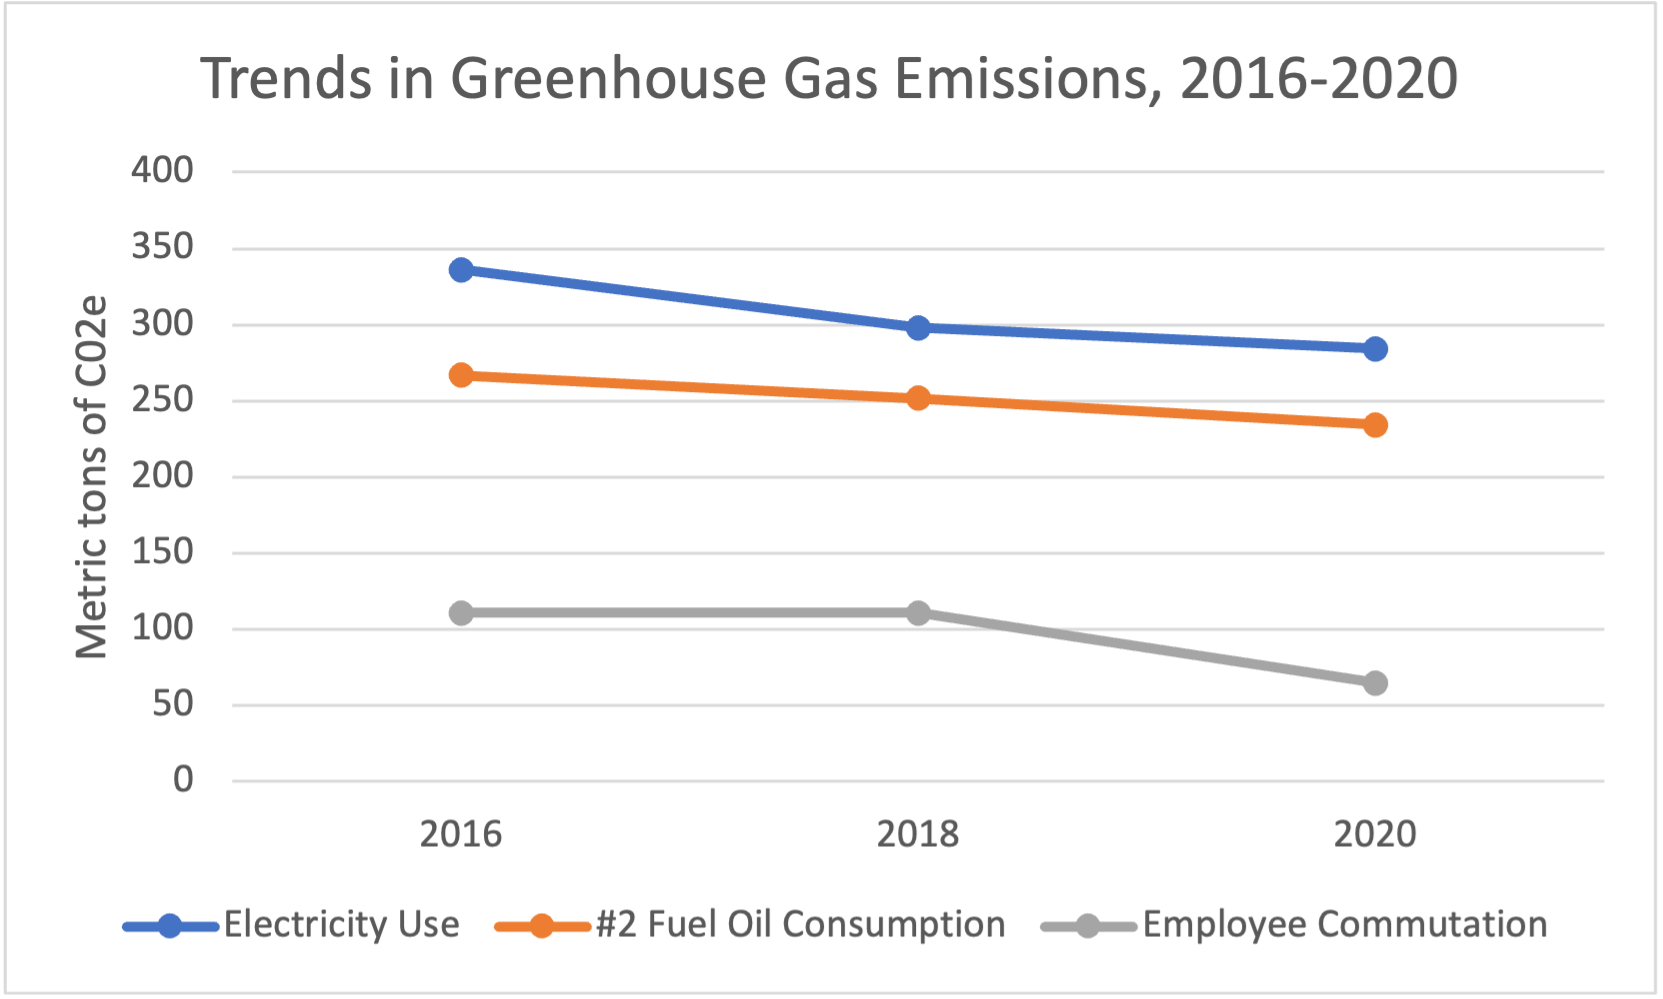 Trends in Greenhouse Gas Emissions, 2012-2020